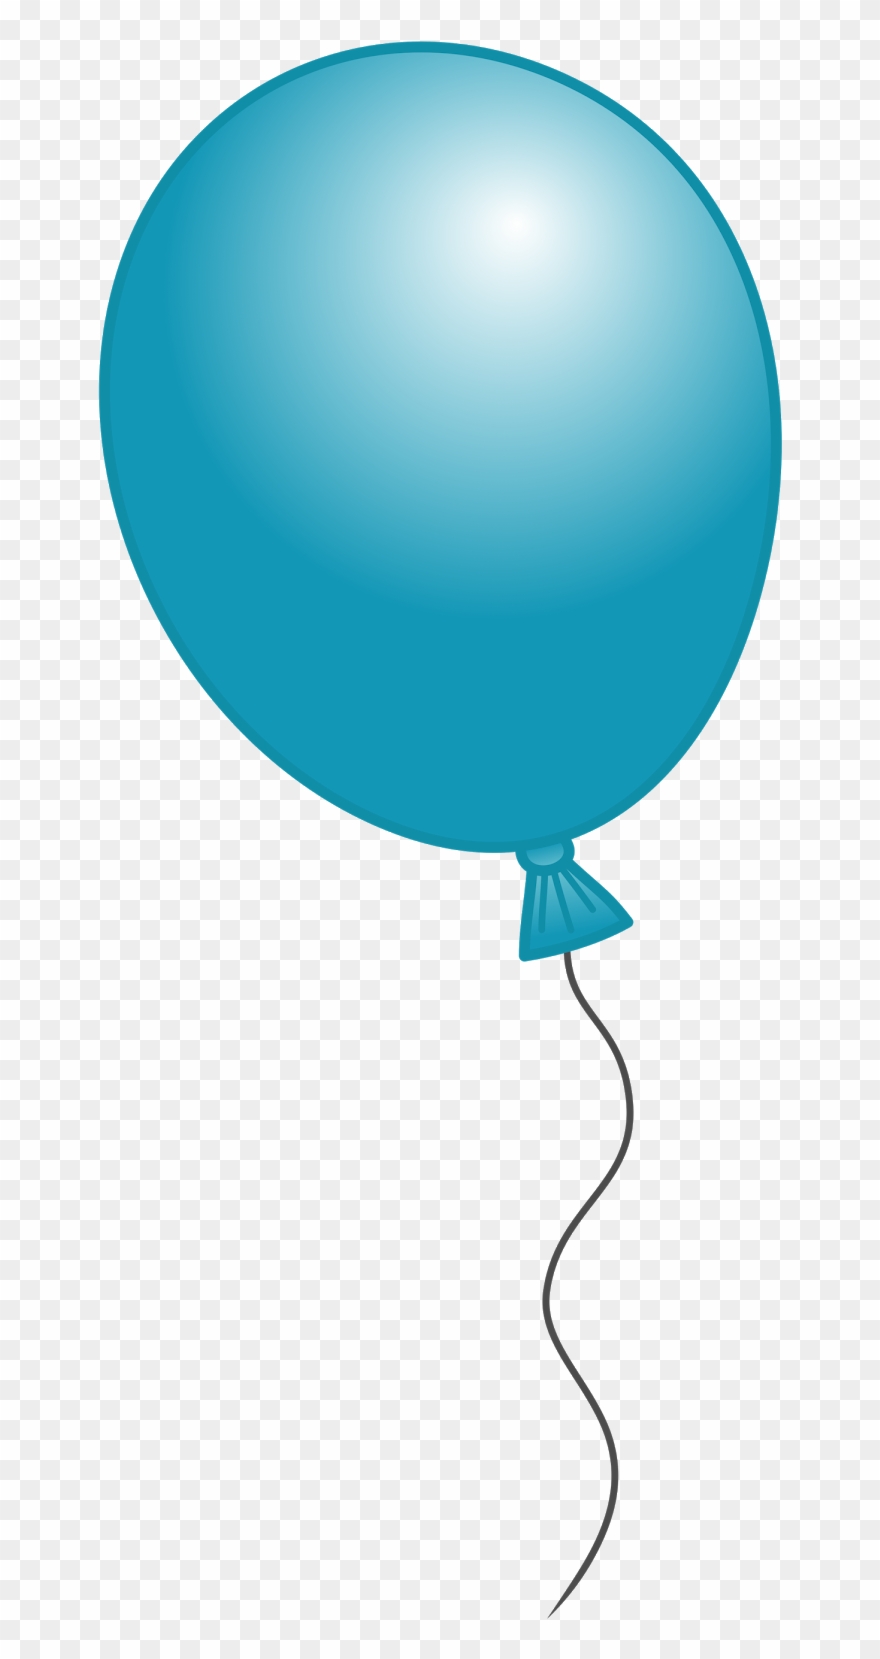 Black Balloons Cliparts Free Download Clip Art Free.